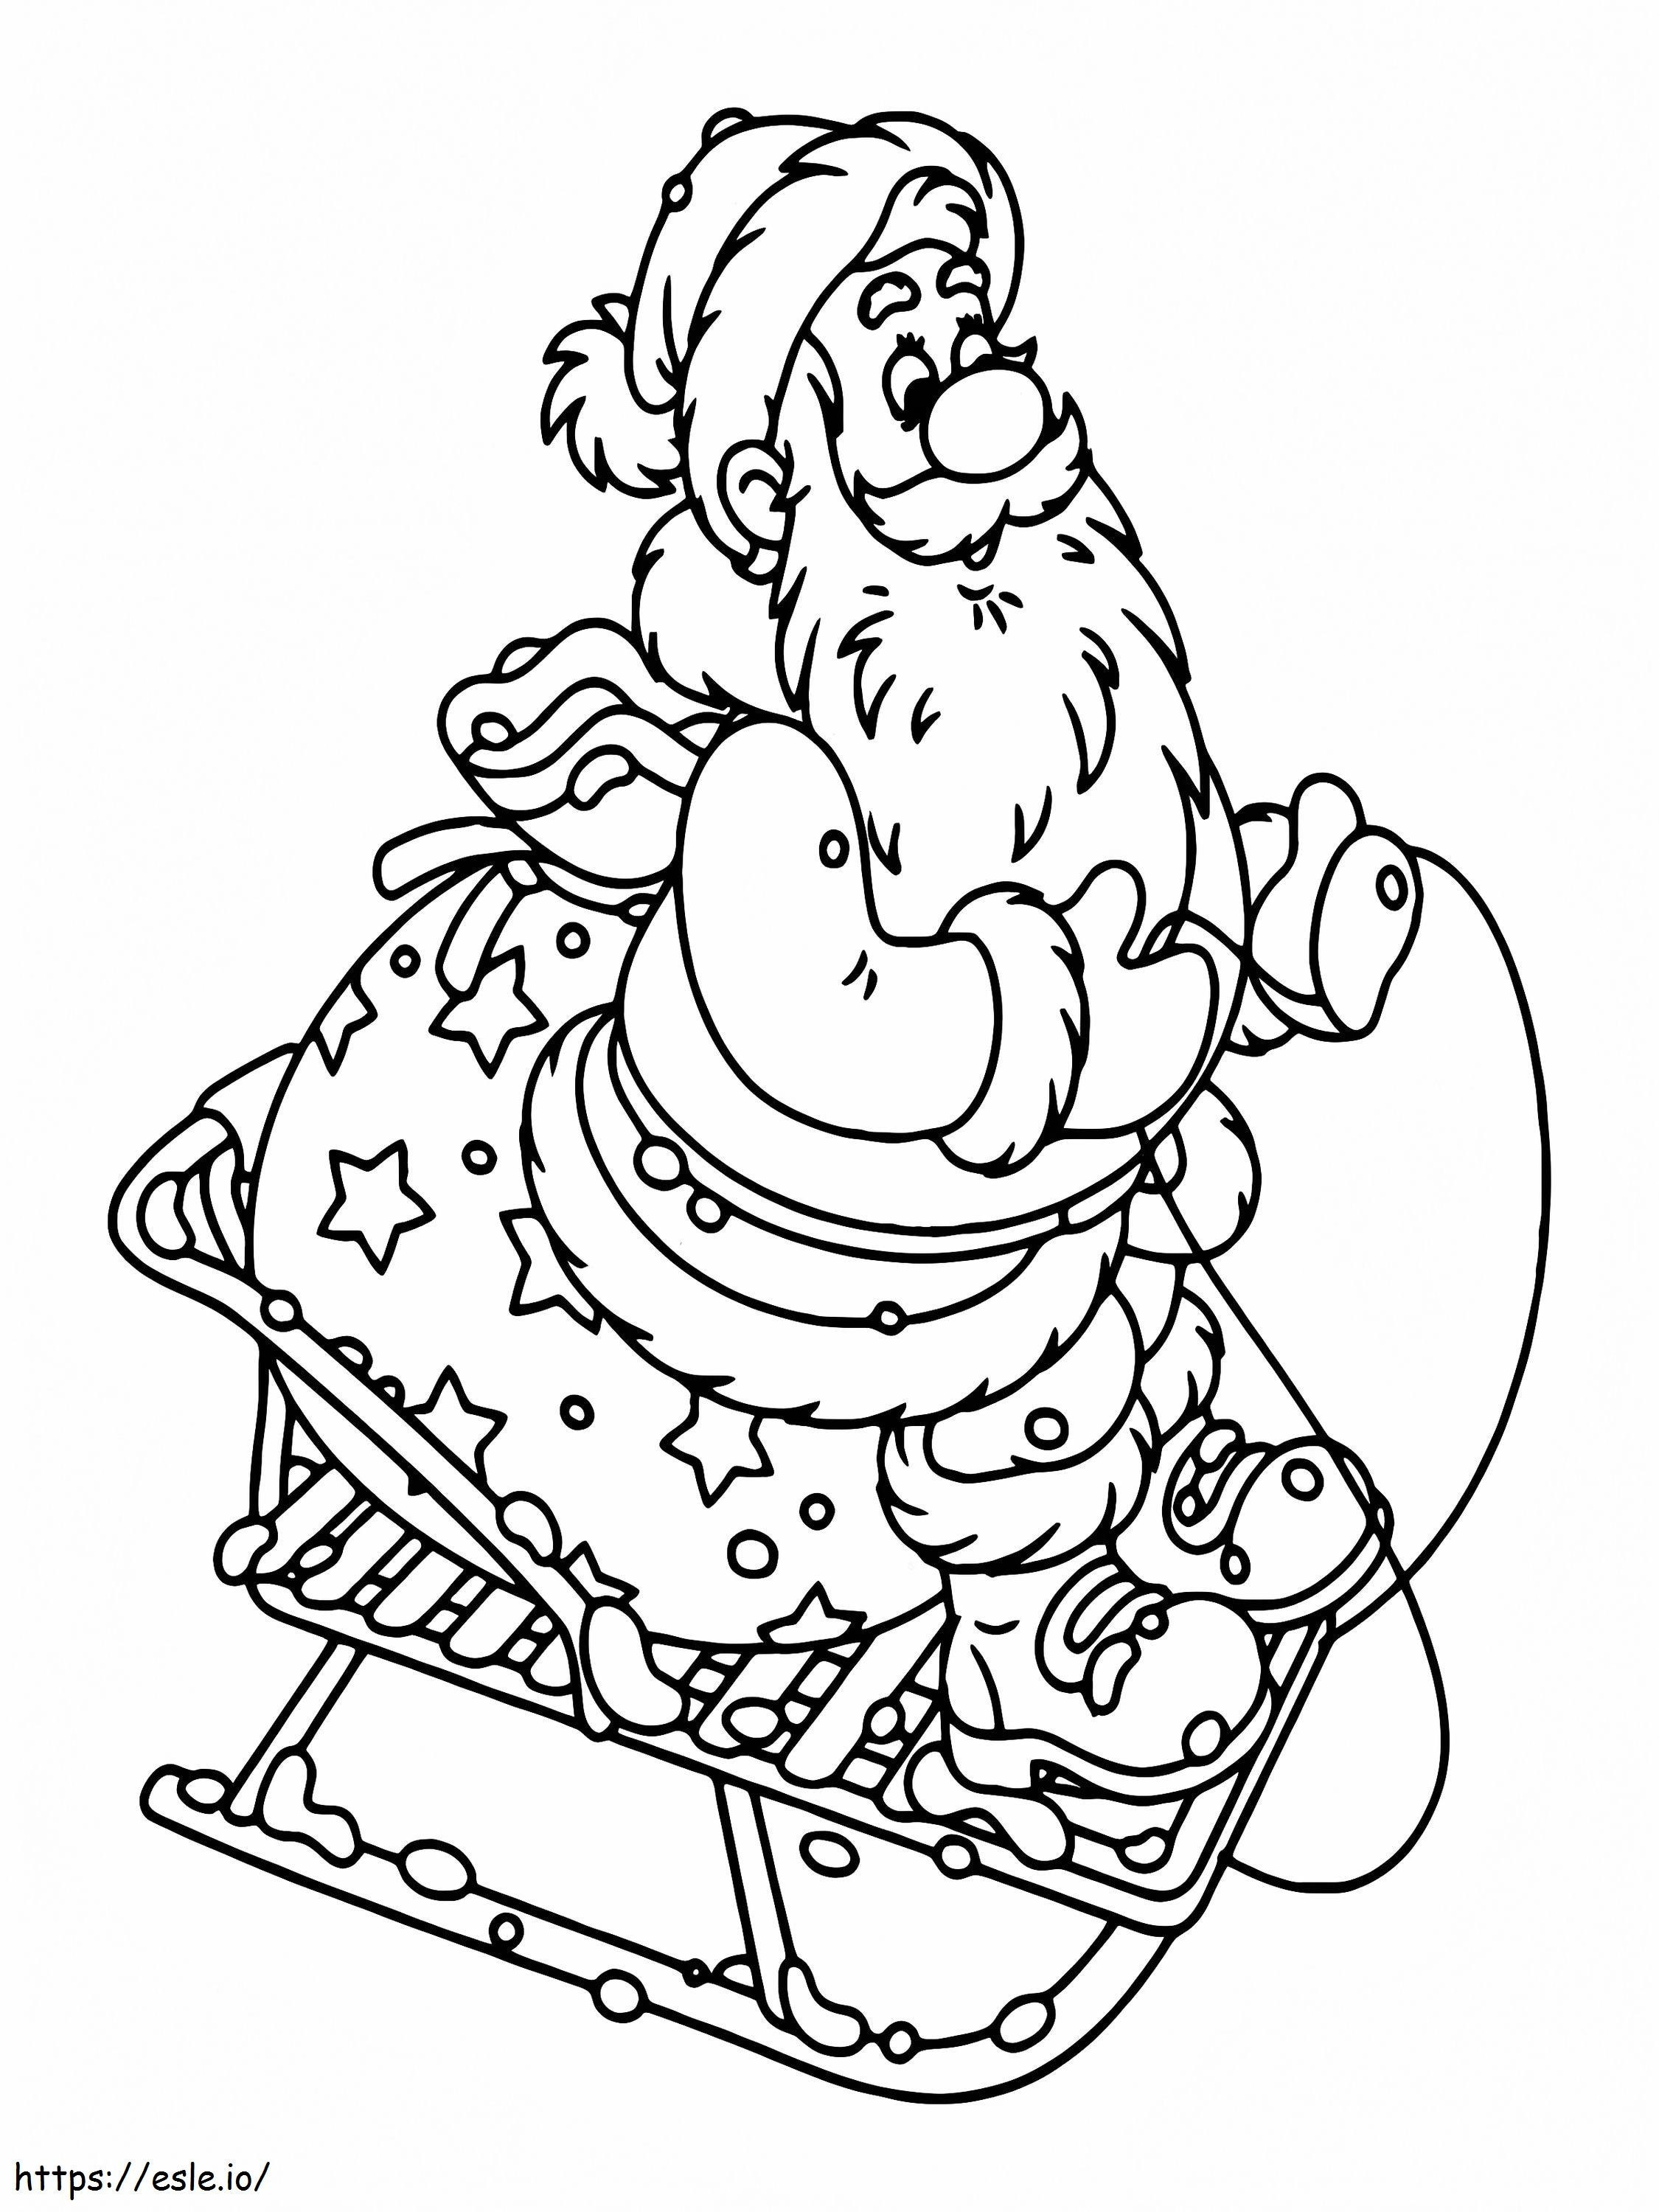 Santa Claus In Sleigh coloring page